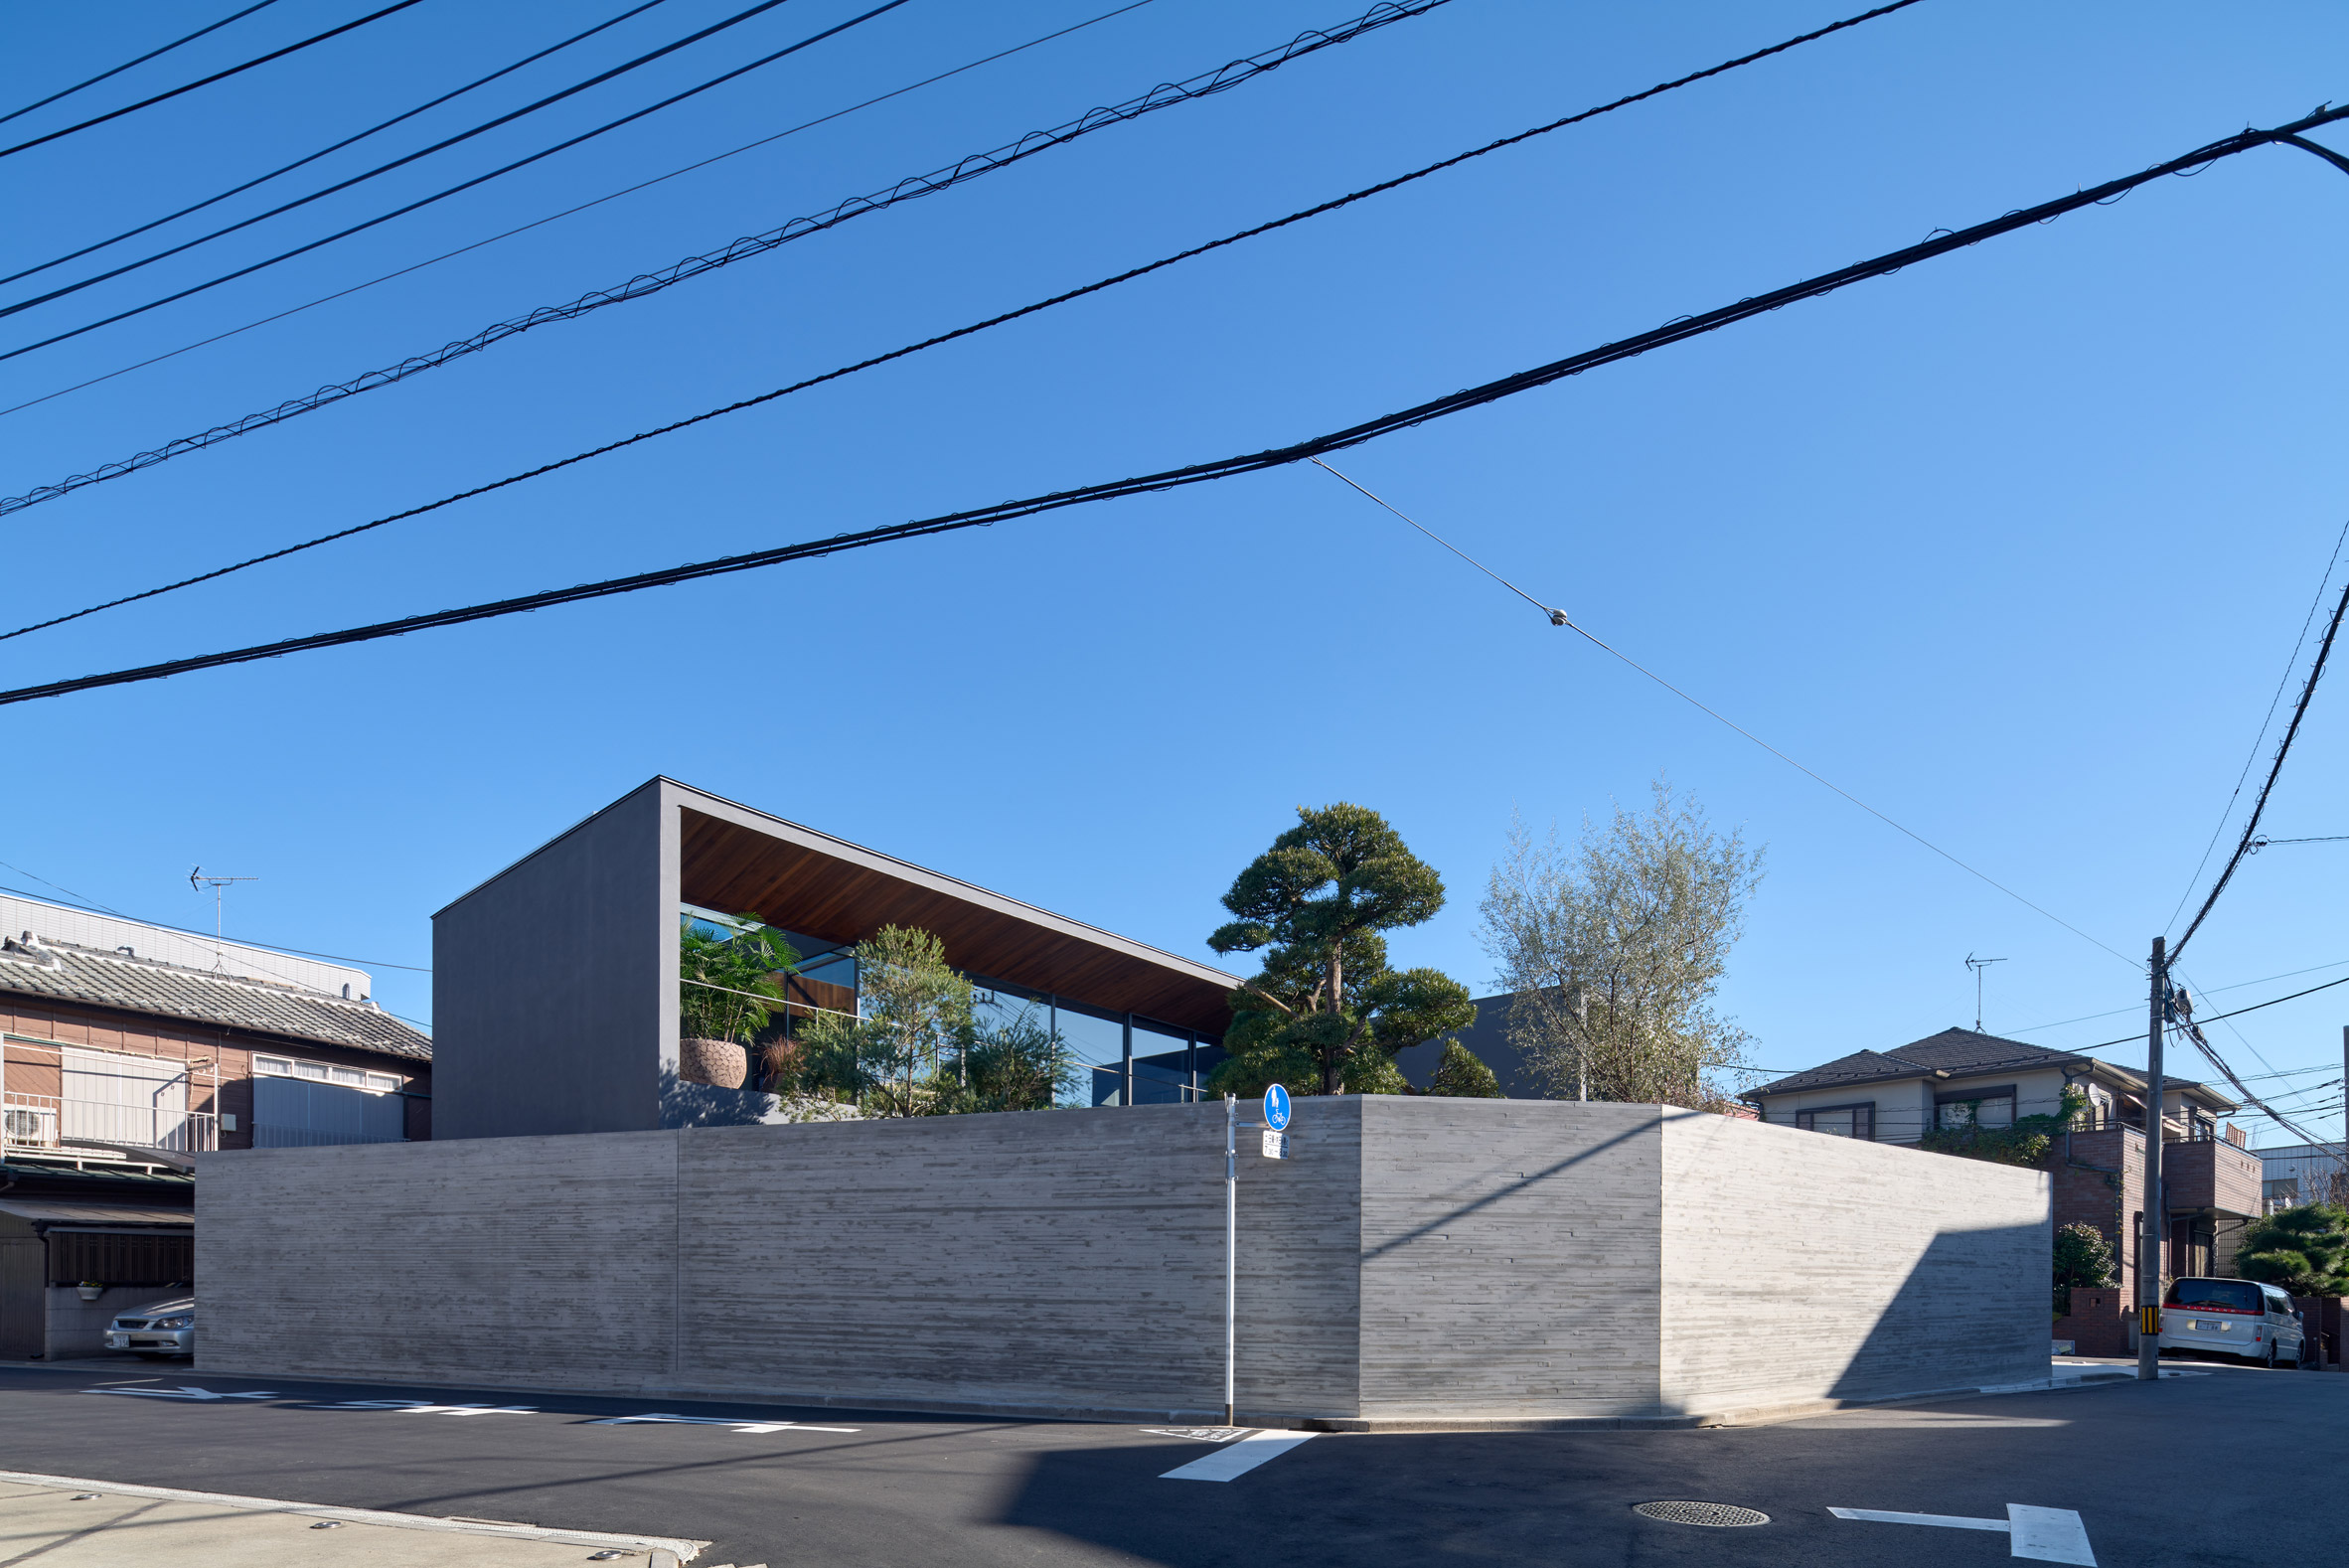 A concrete wall surrounds the home